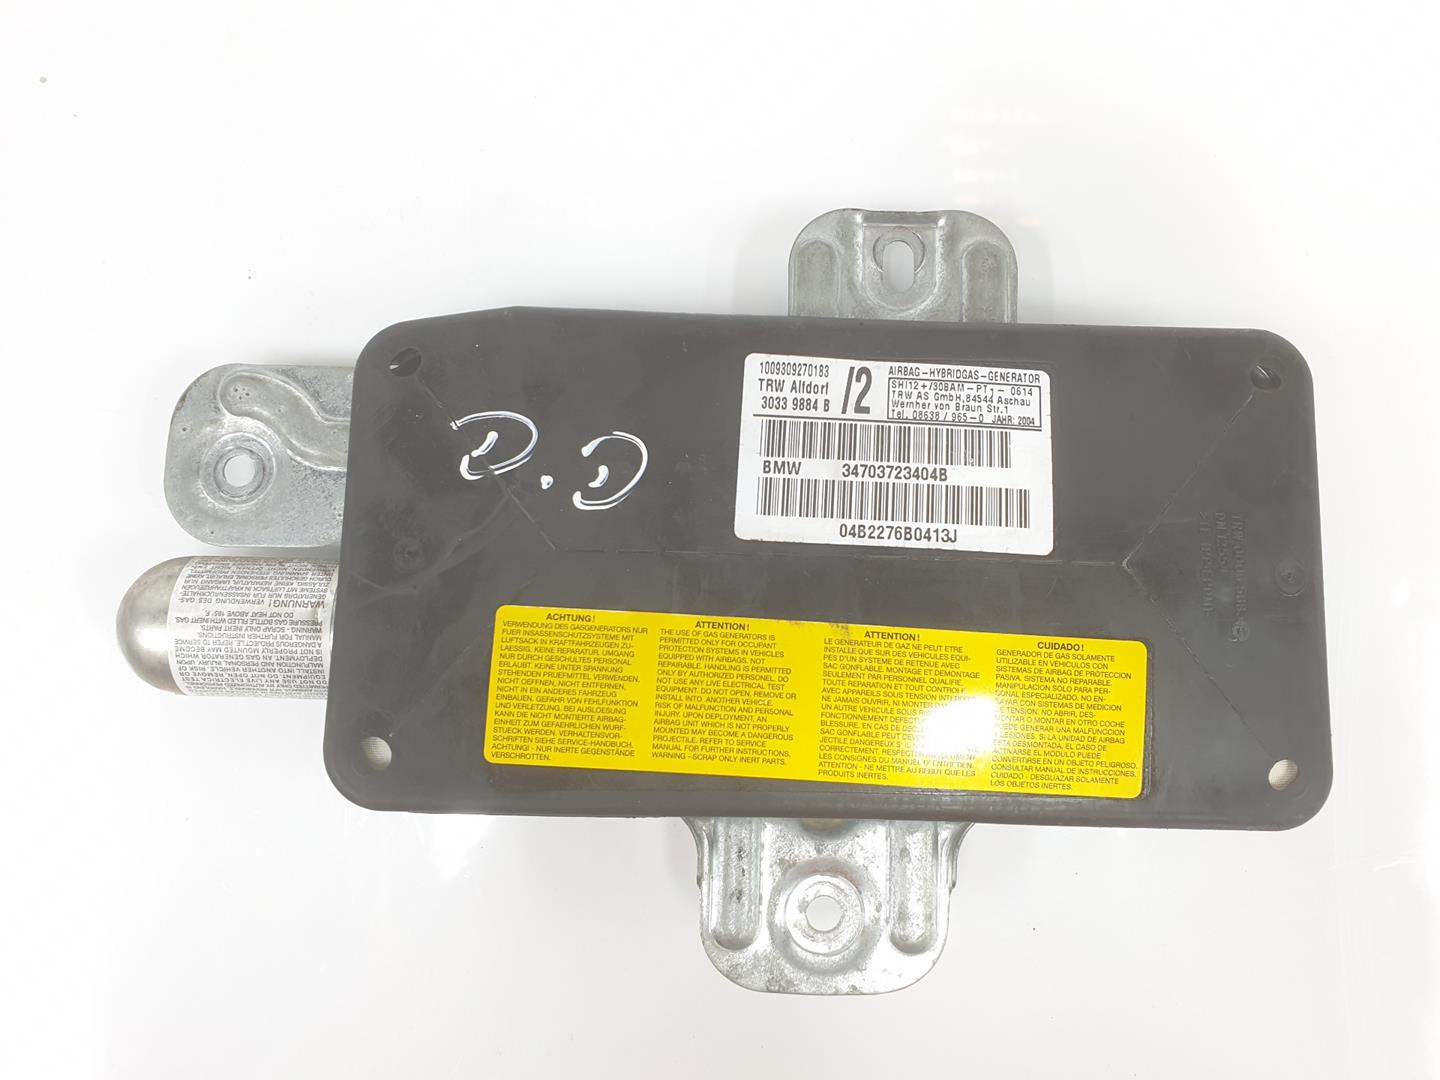 BMW X5 E53 (1999-2006) Other Control Units 7037234, 72127037234 19898490